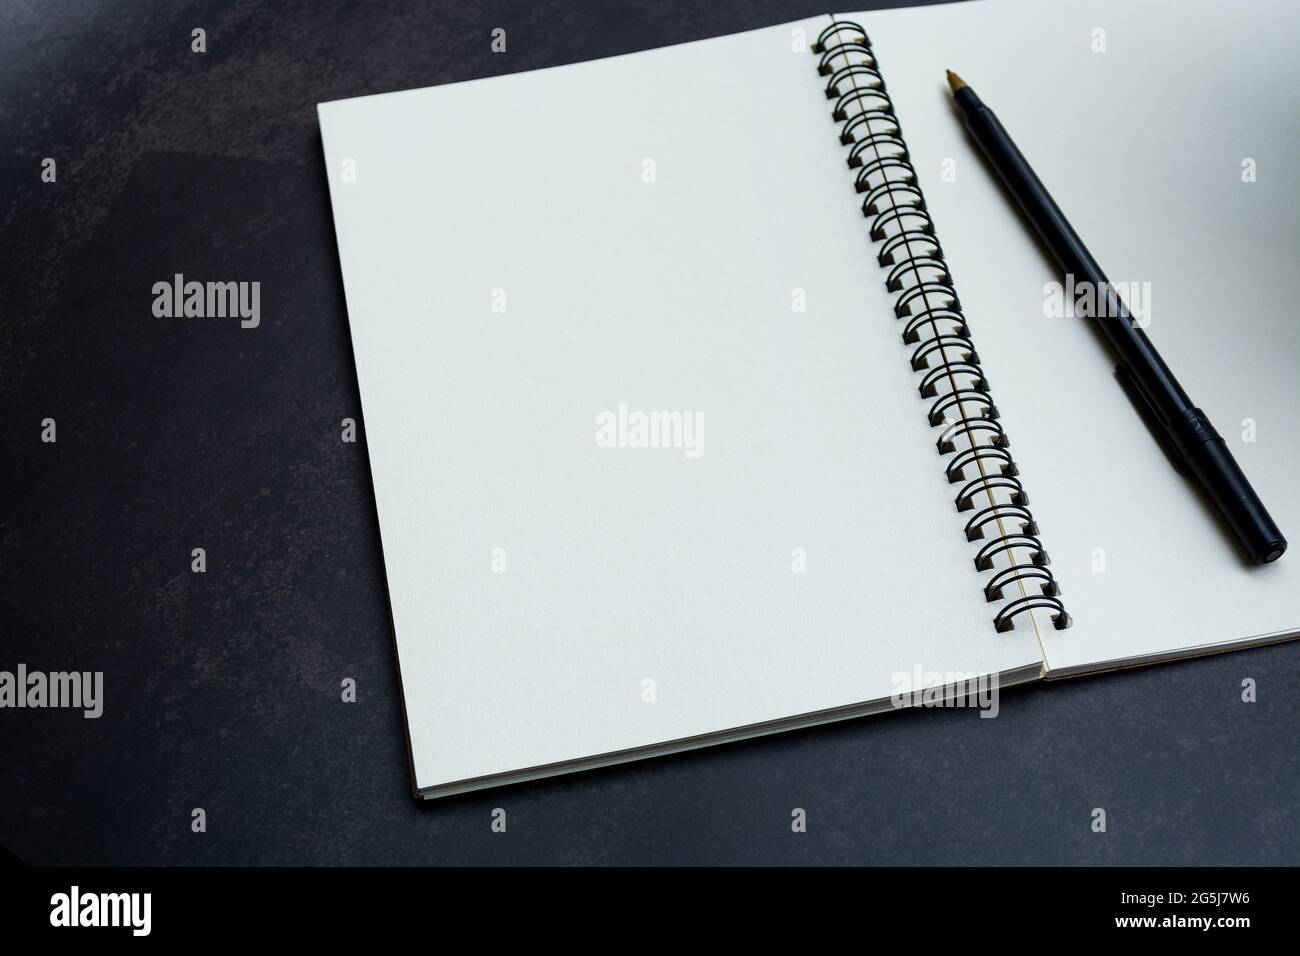 White notebook and pen on dark background Stock Photo